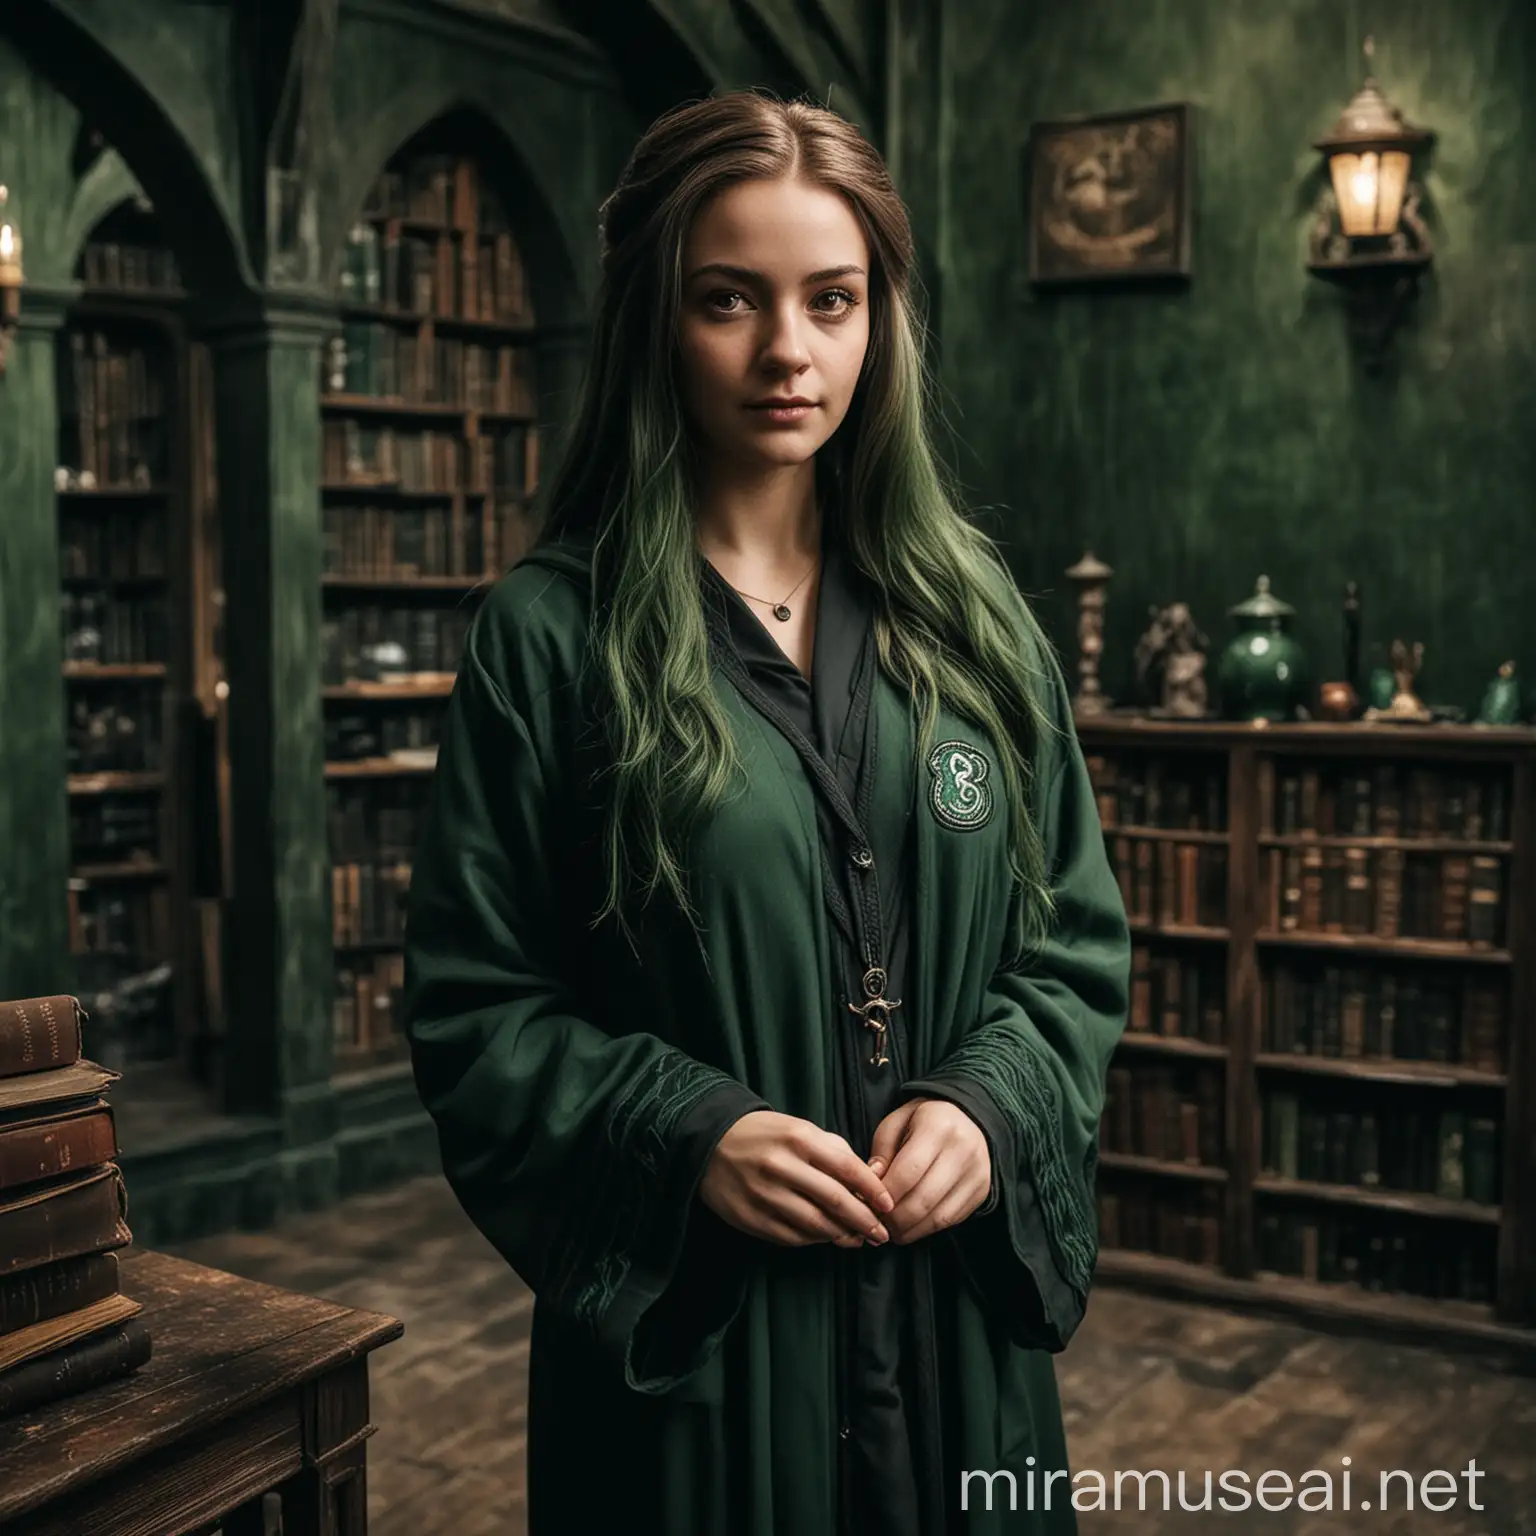 This woman, in the picture, is in Slytherin house at Hogwarts Witchcraft and Wizardry. She is in Slytherin Common Room and wearing Slytherin robe.